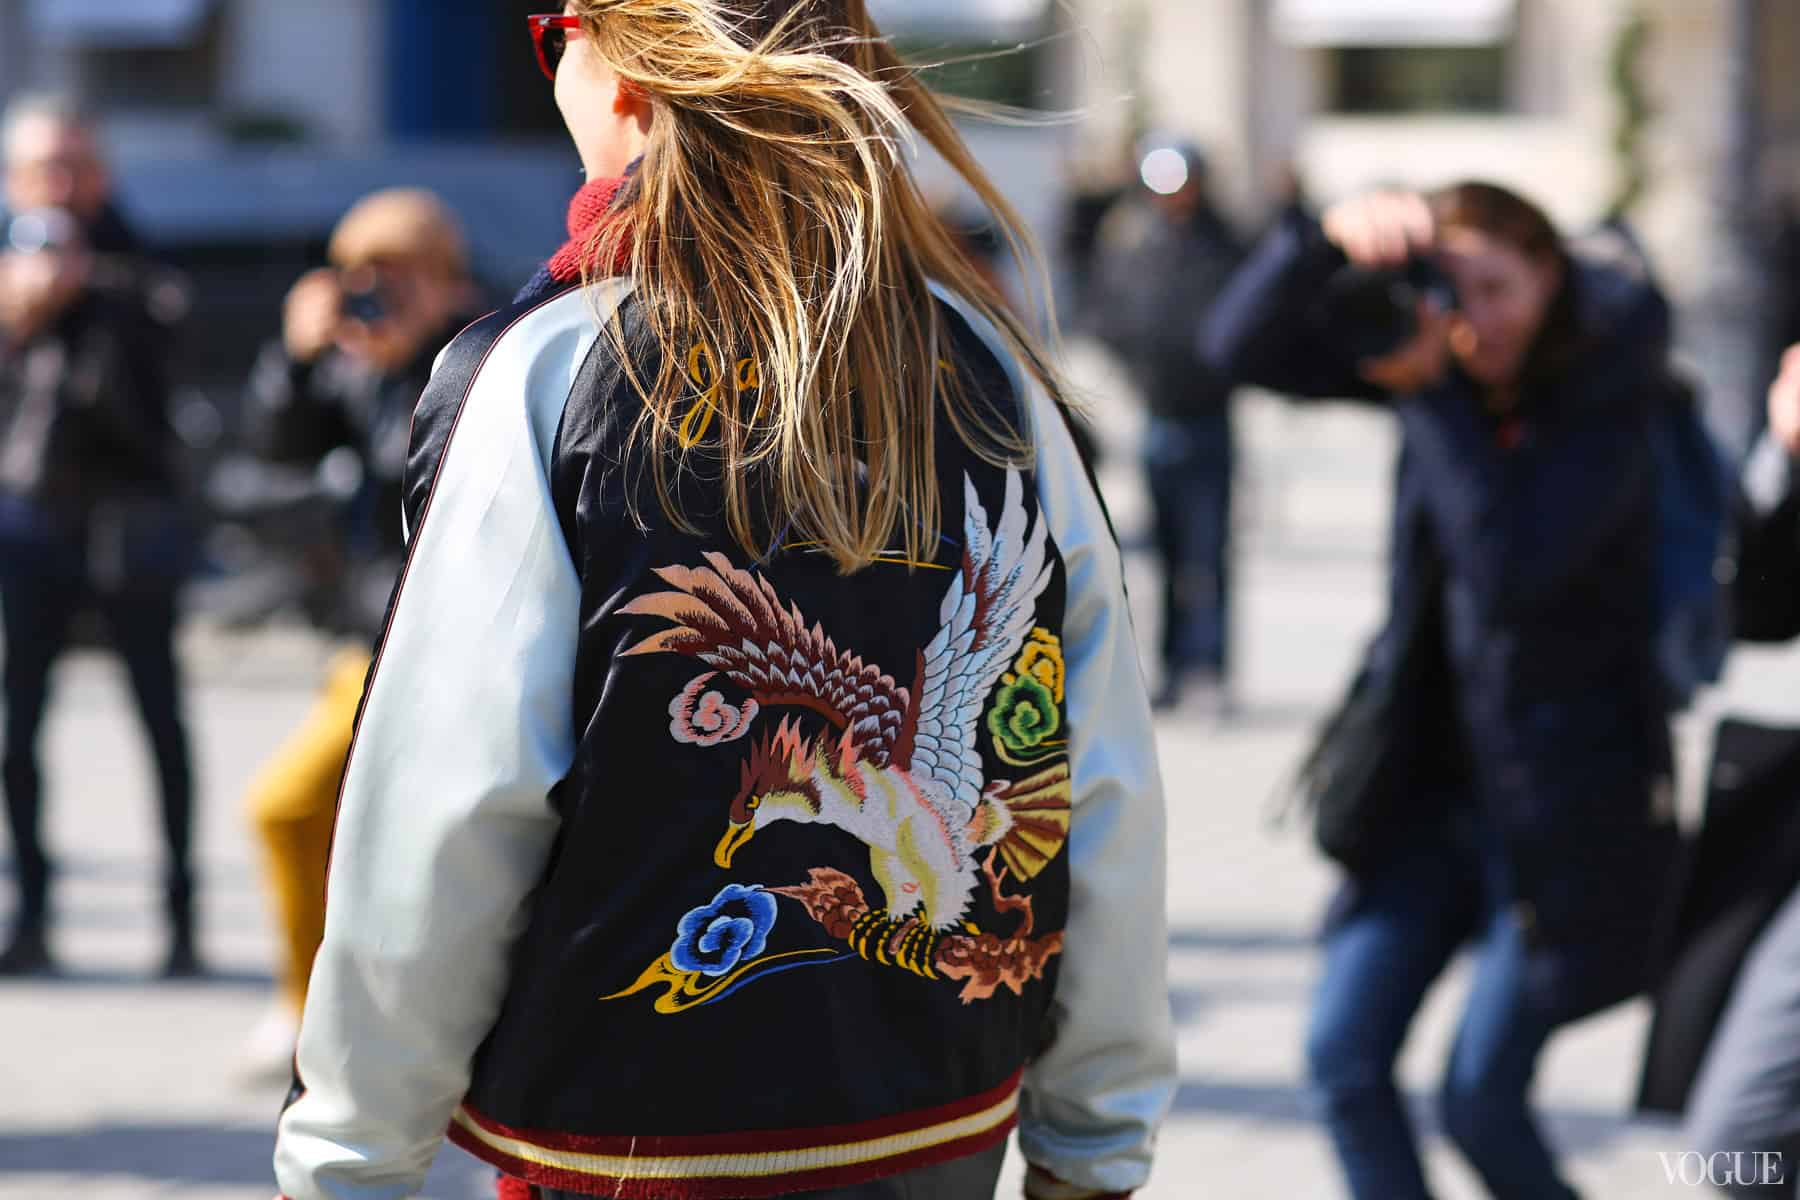 The BOMBER Jacket: Must Have OR Not? | Fashion Tag Blog